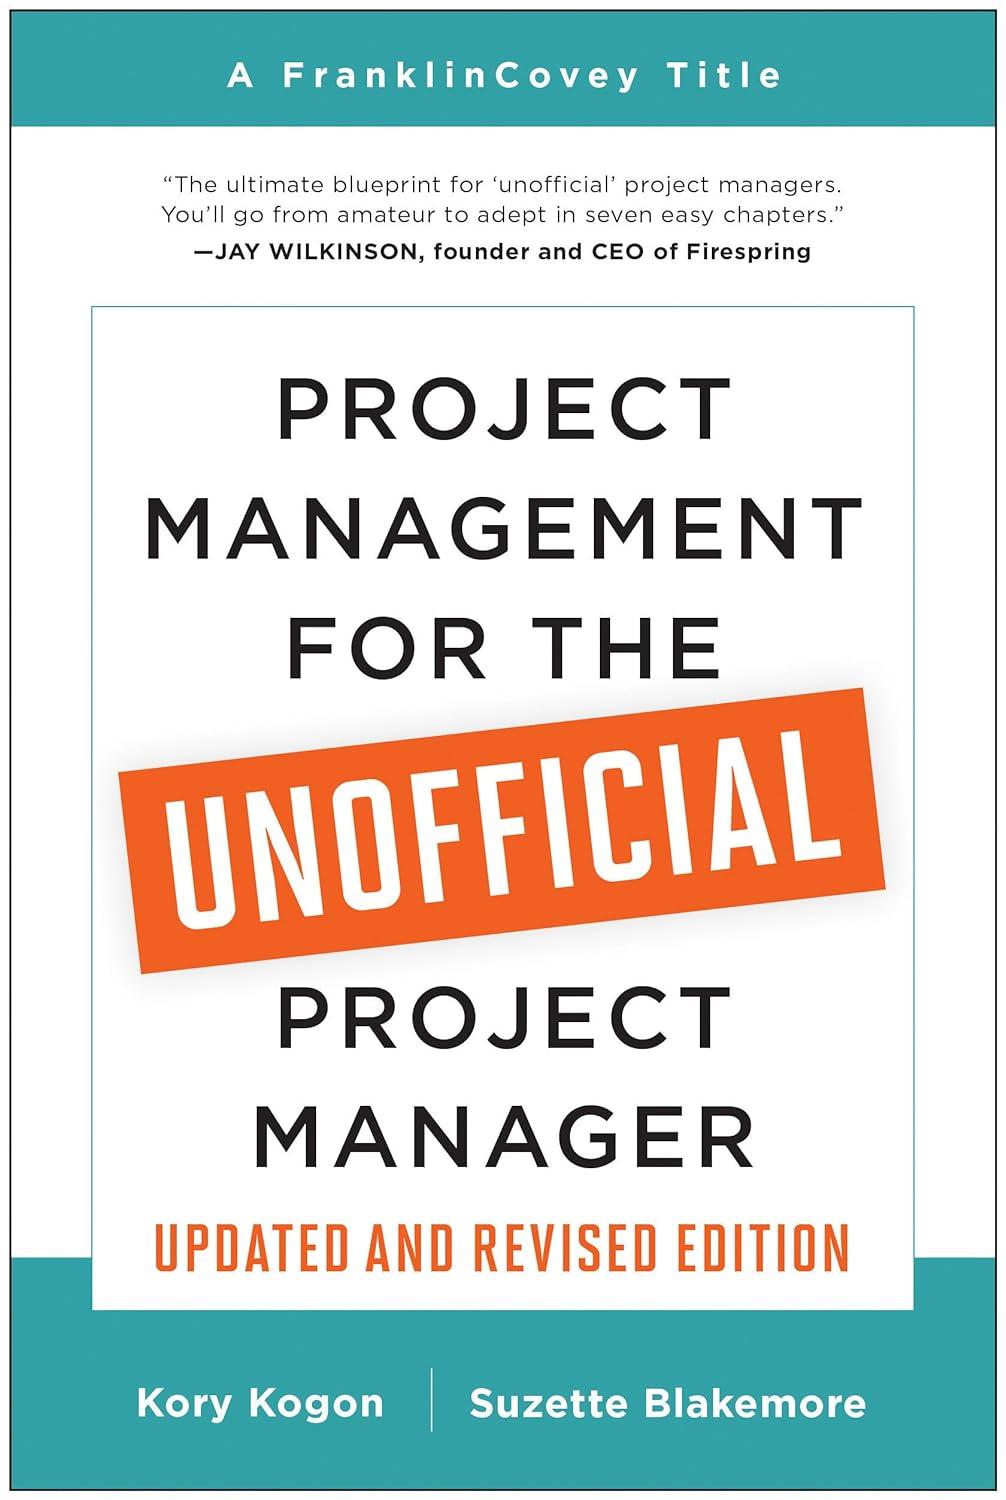 project management for the unofficial project manager 1st updated revised edition kory kogon, suzette